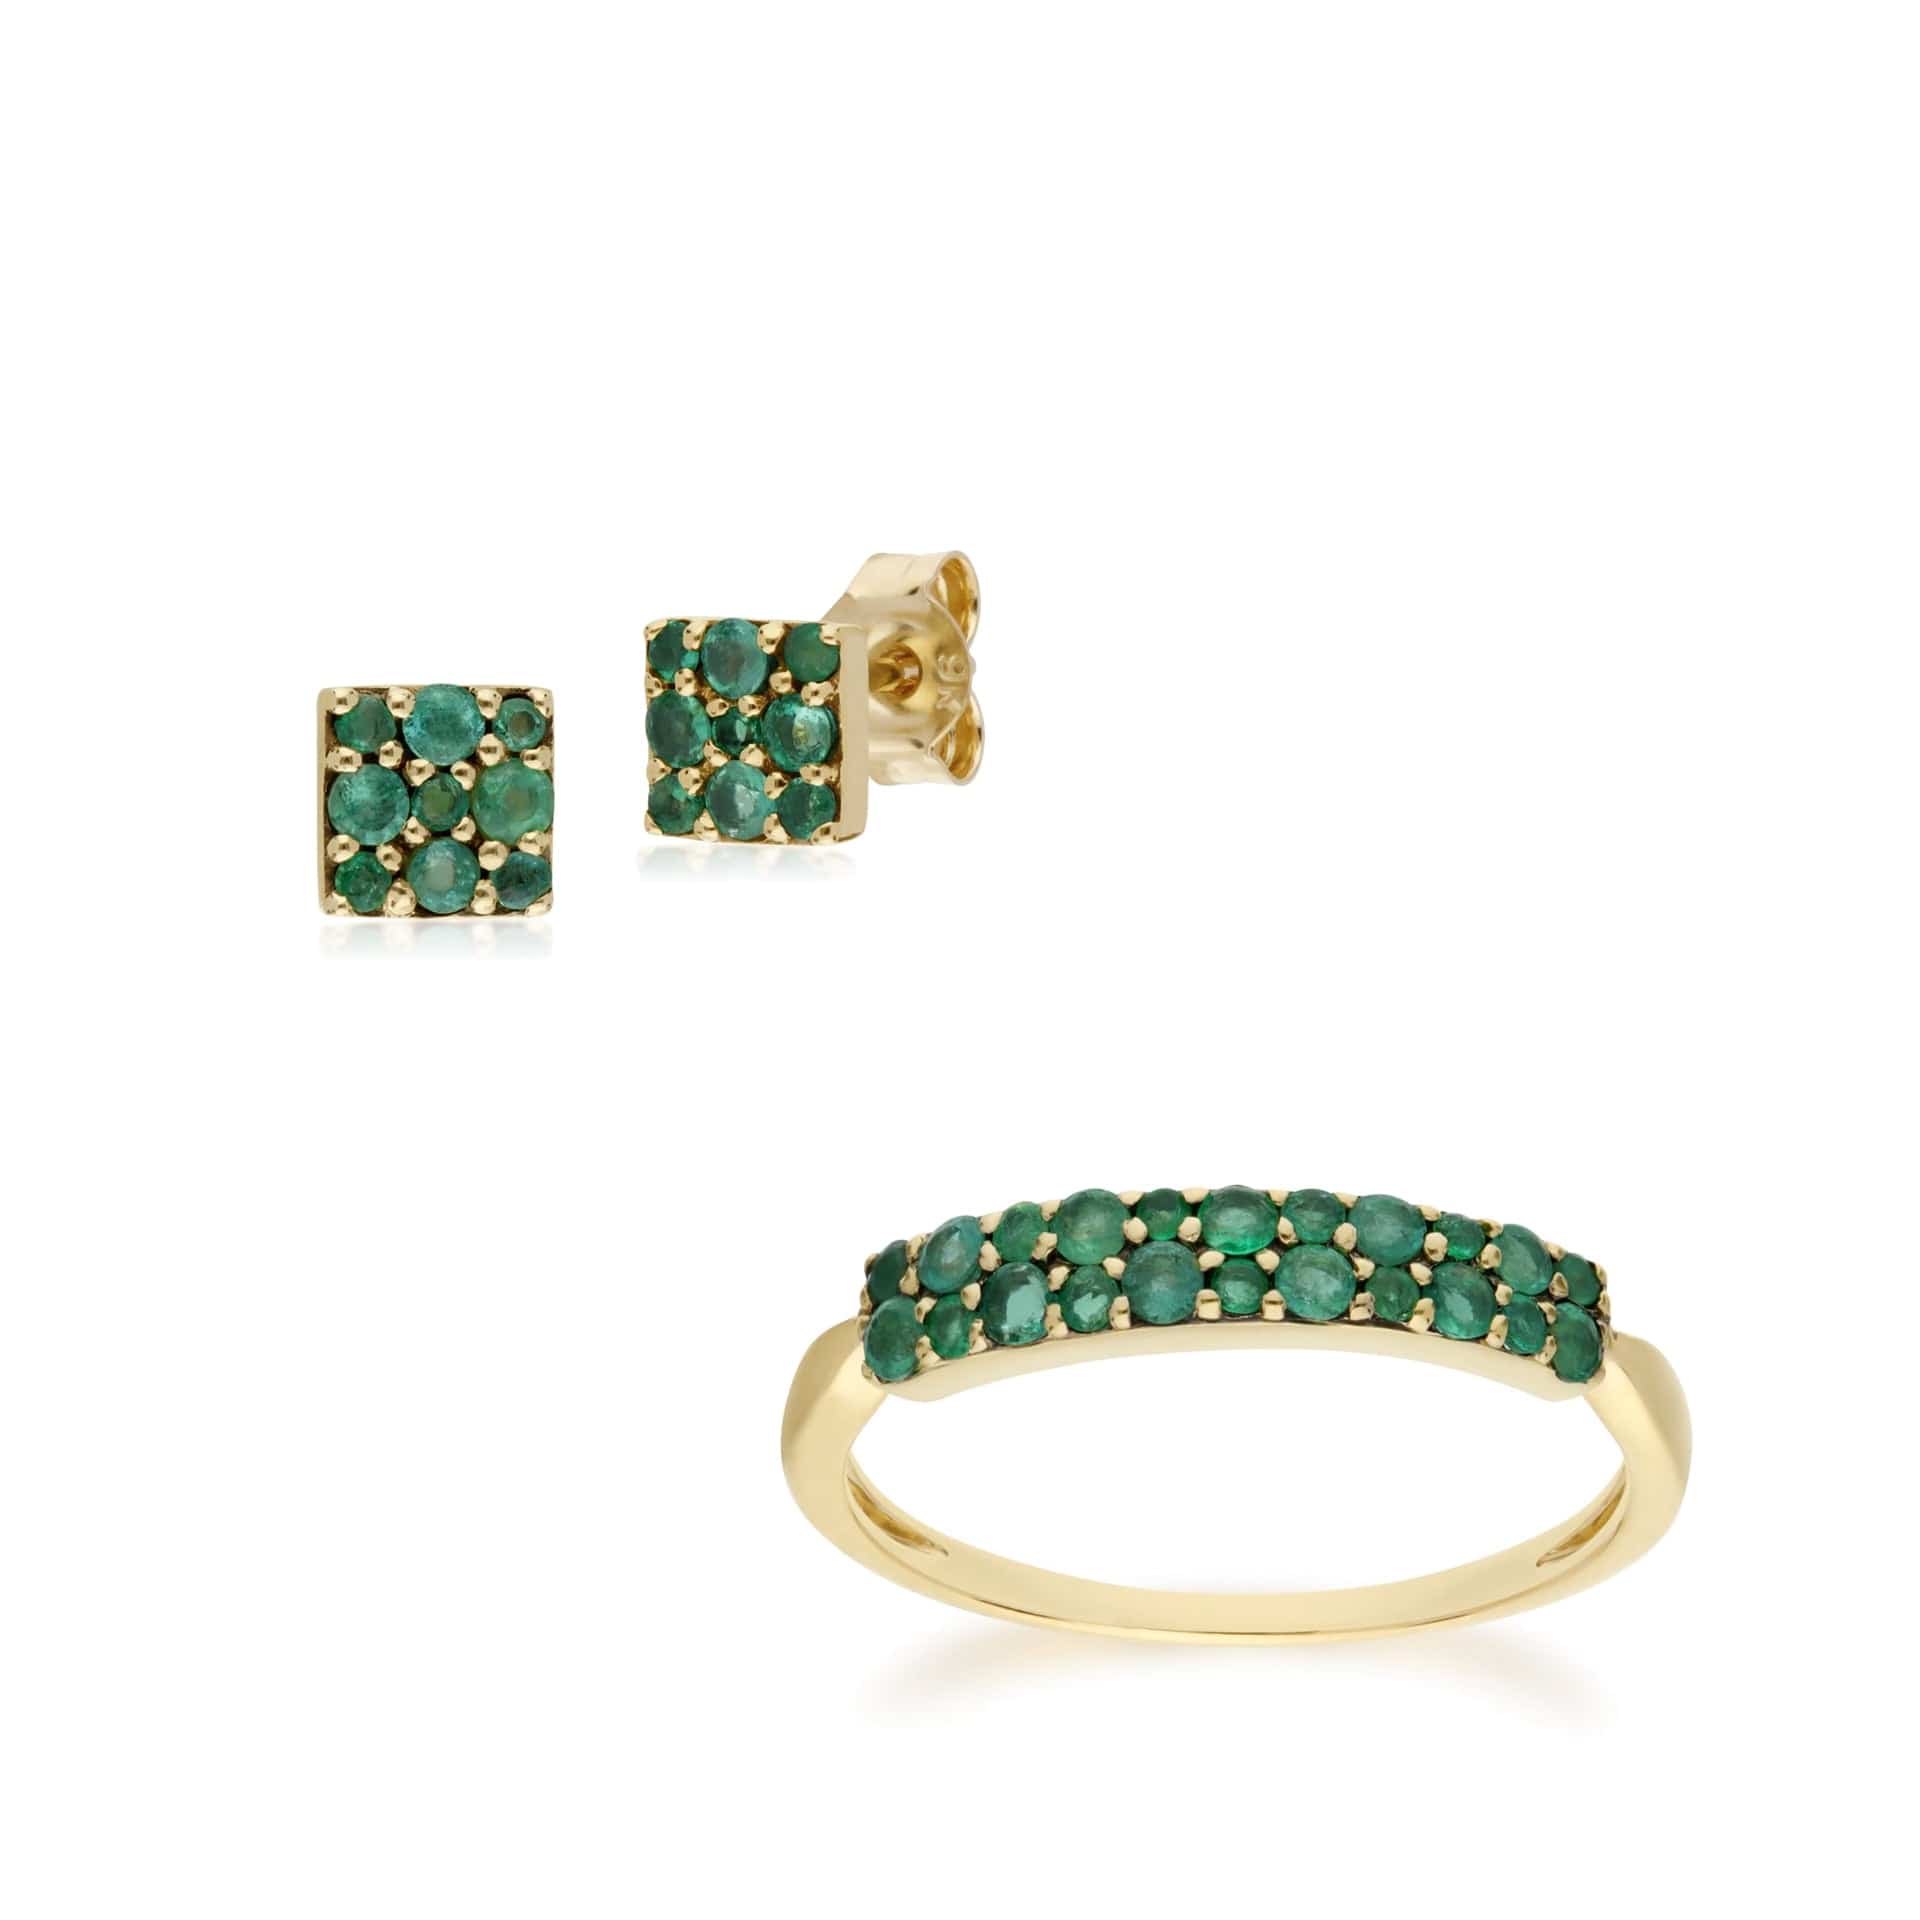 132E2573039-132R8081039 Classic Round Emerald Cluster Panel Stud Earrings & Ring Set in 9ct Yellow Gold 1